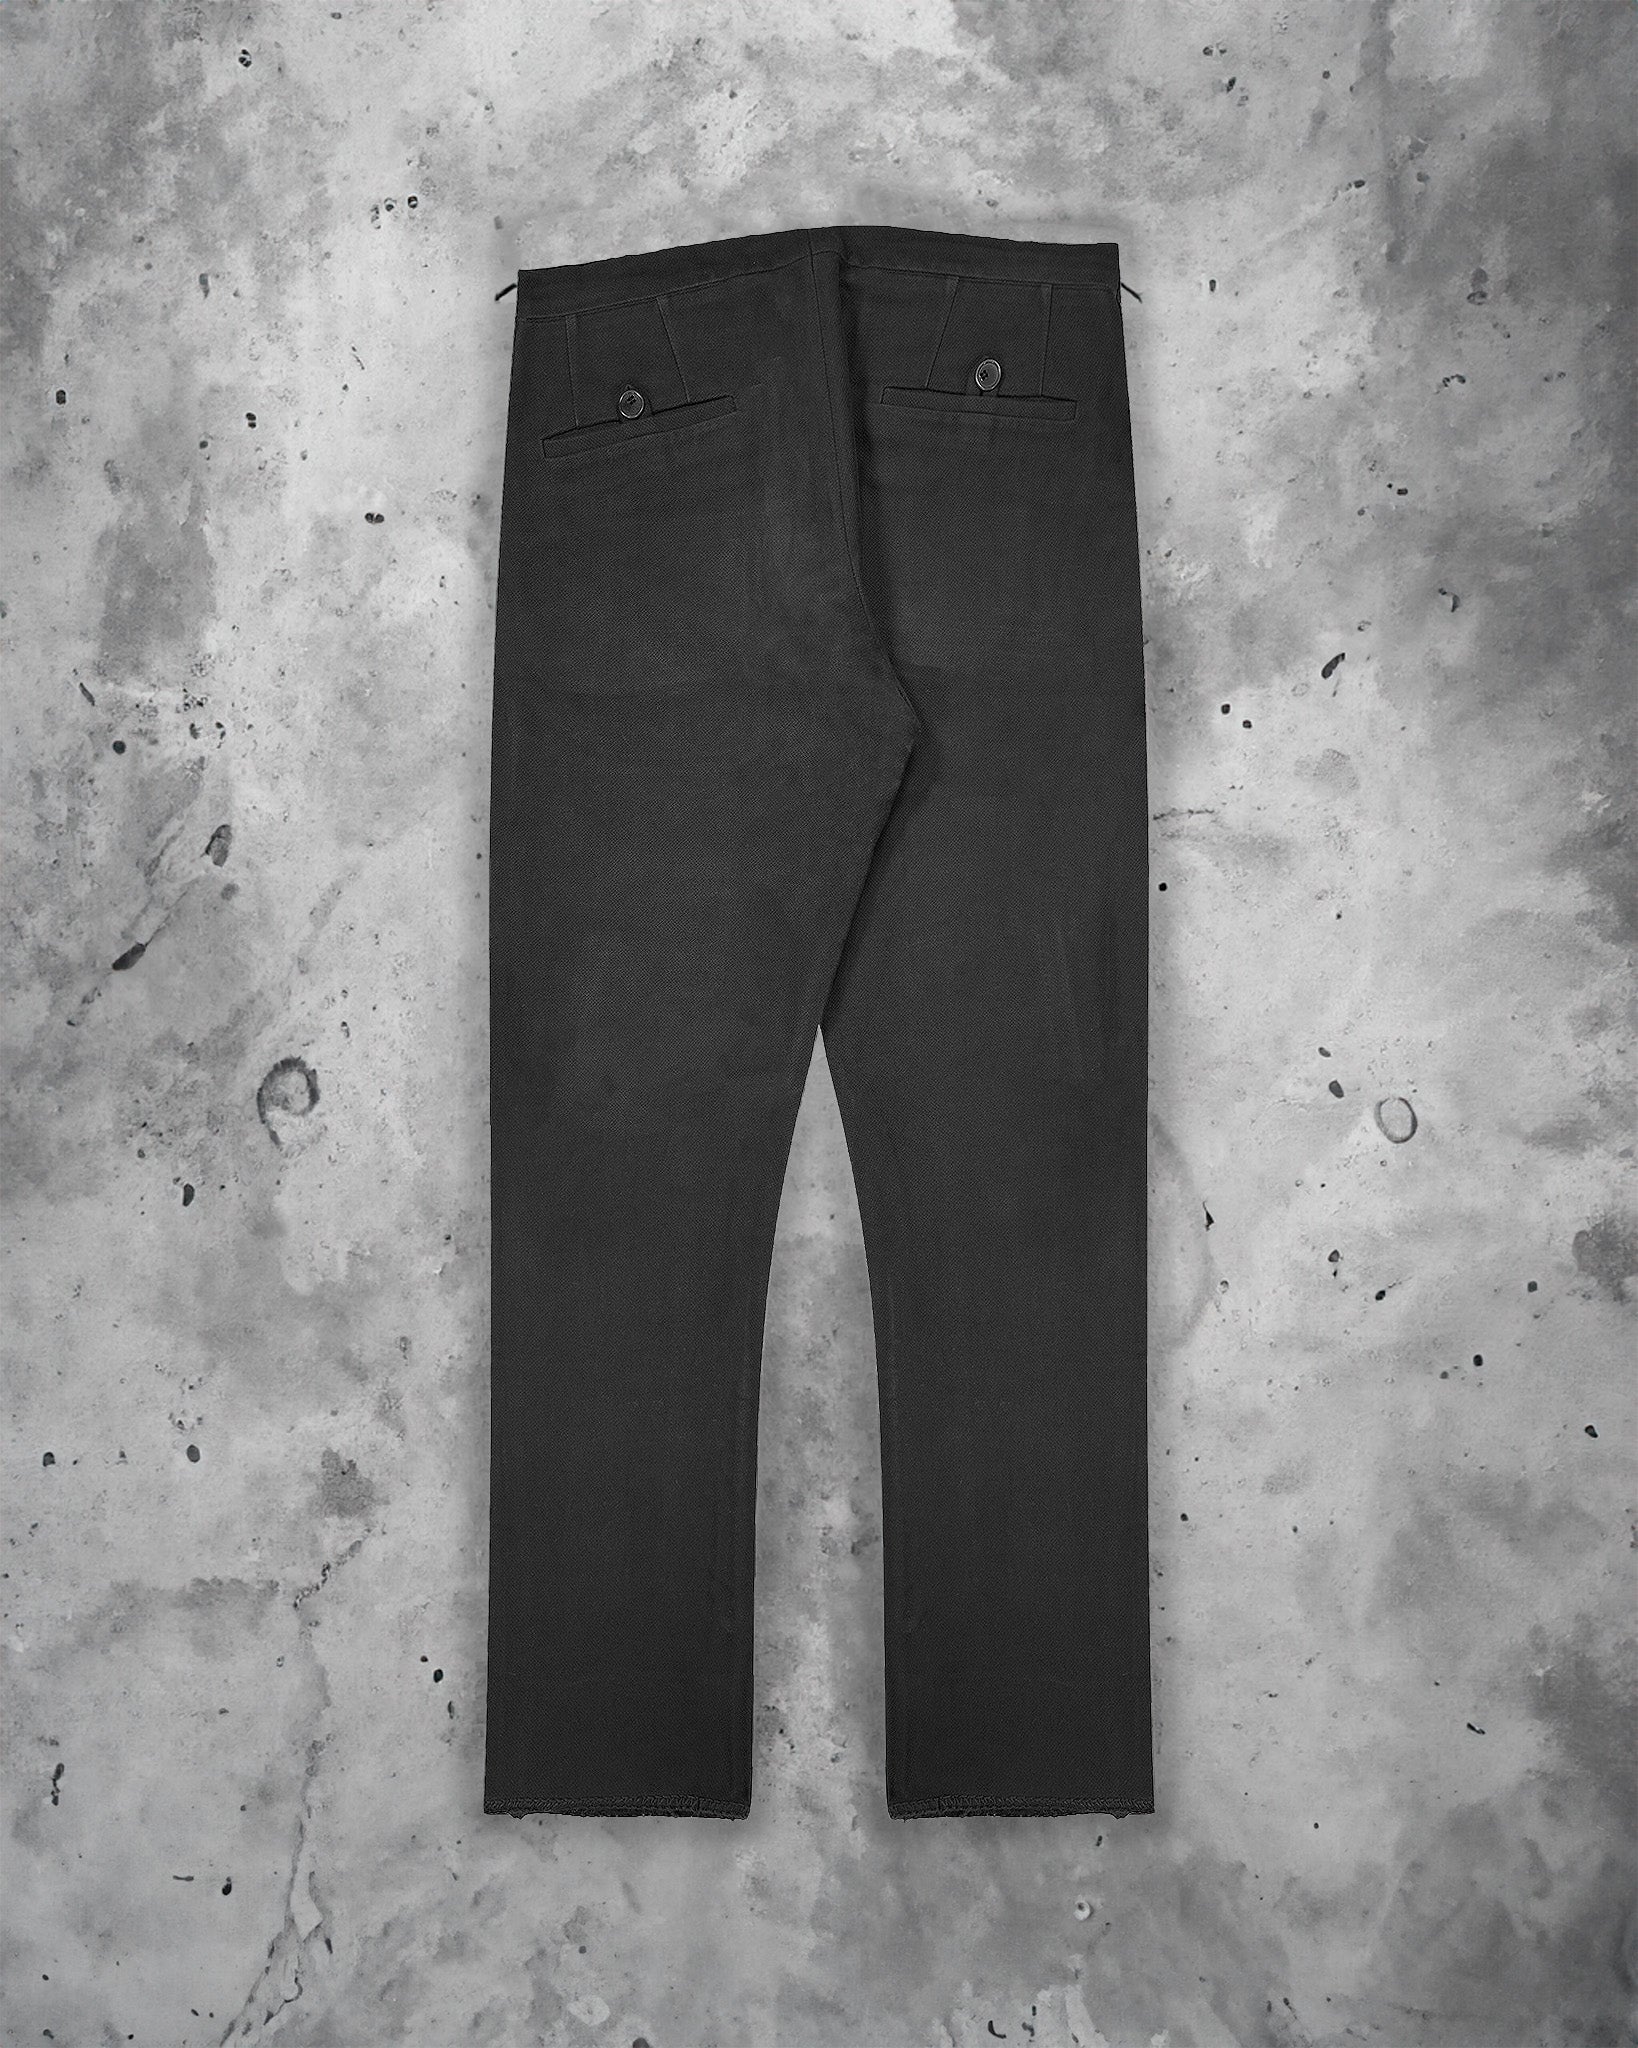 Carol Christian Poell Overlock Trousers - SS05 “Dispossessed (PM/1992 HIS/11)